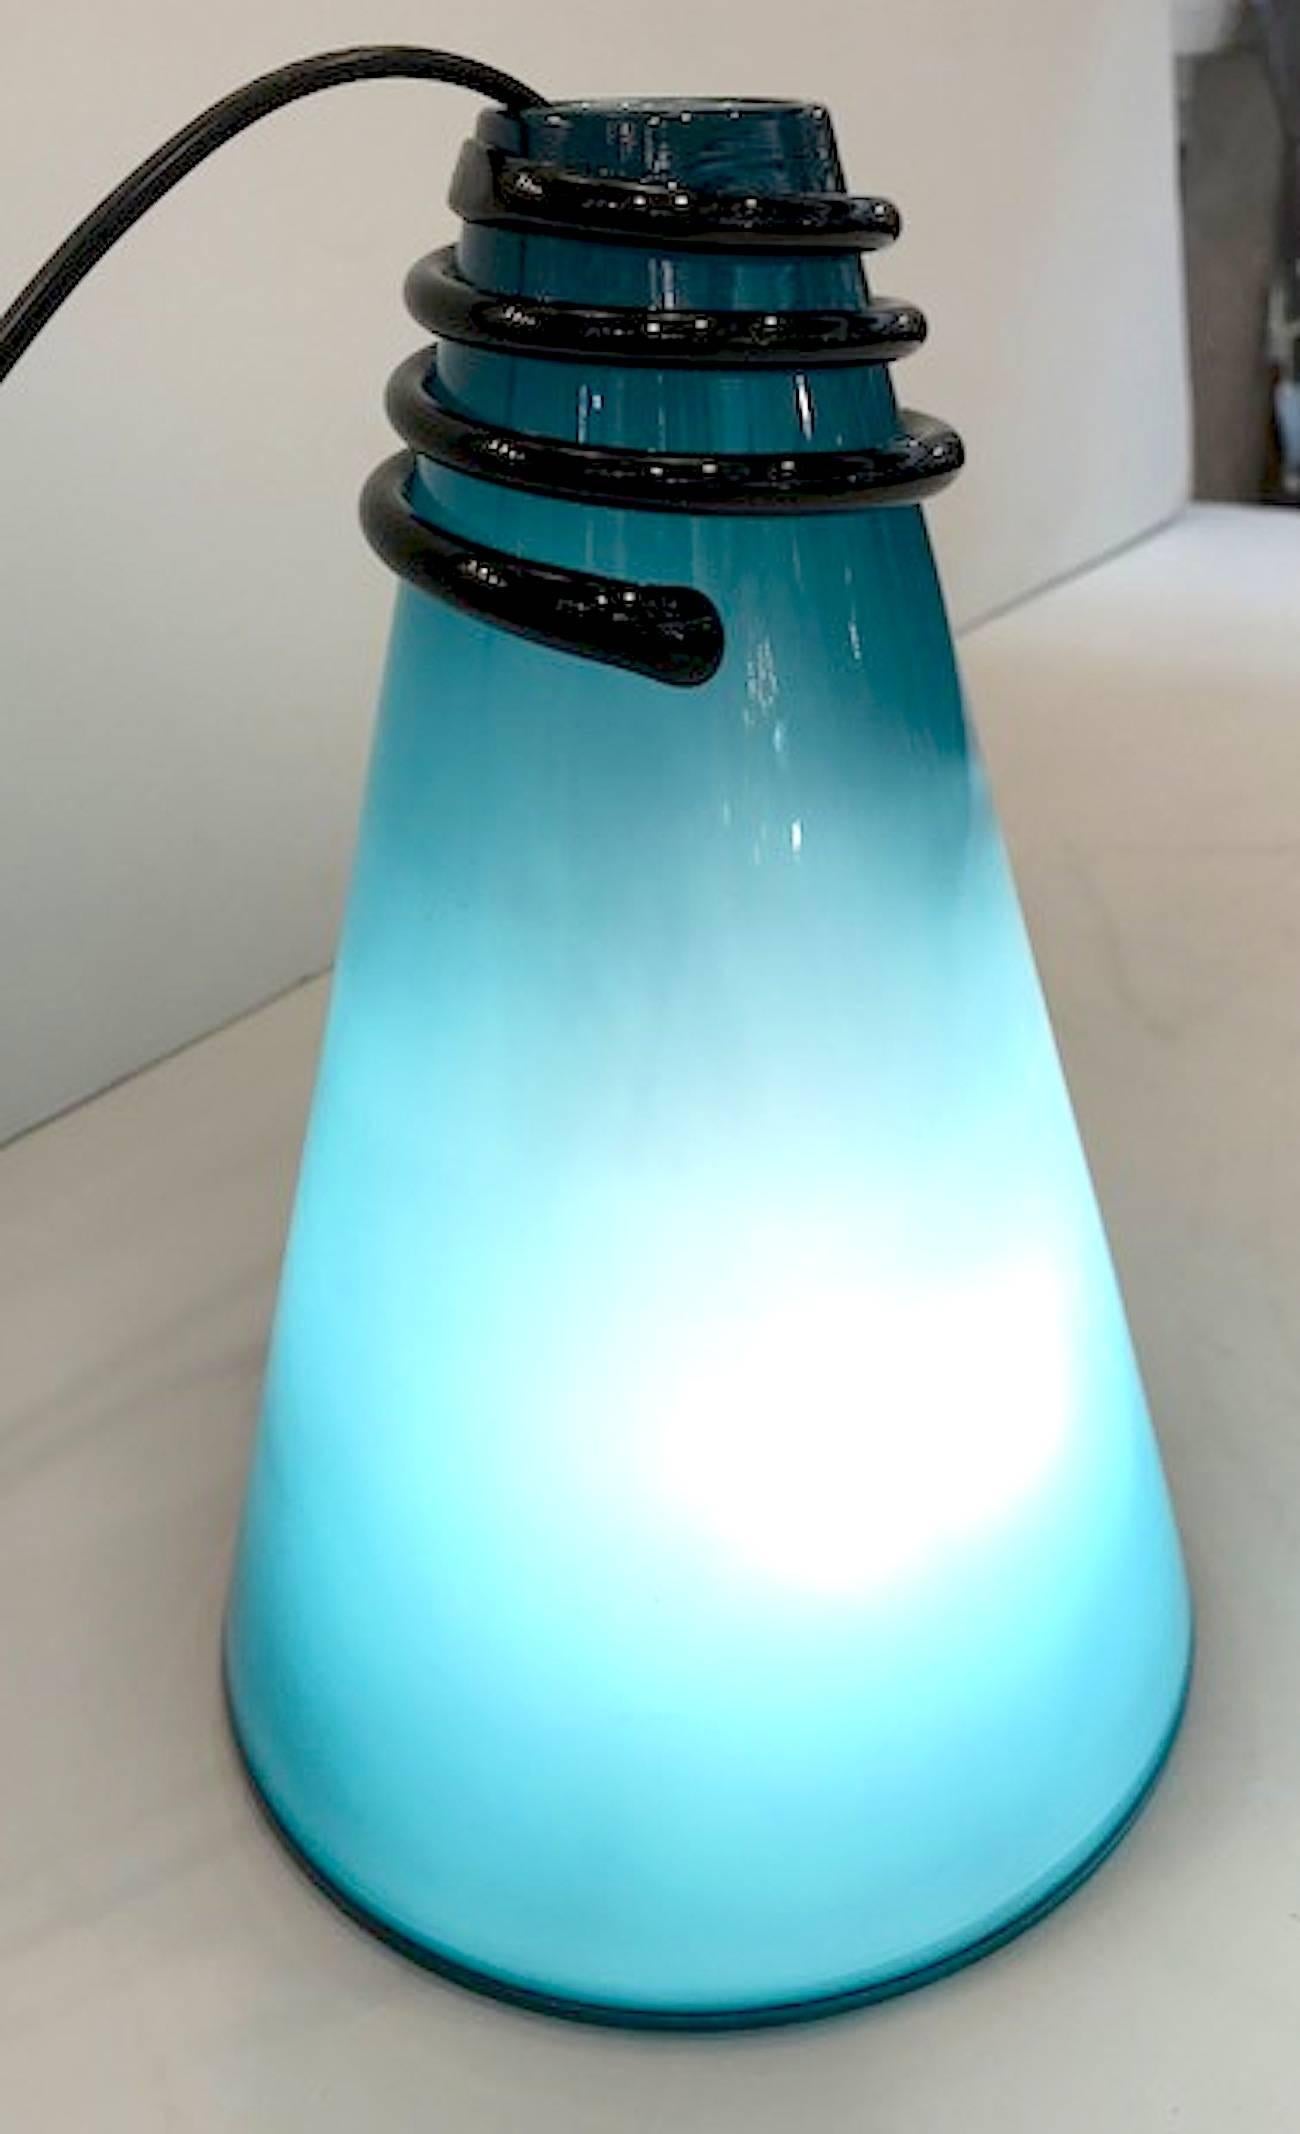 VeArt 1980s Cone Vase Table Lamp For Sale 2